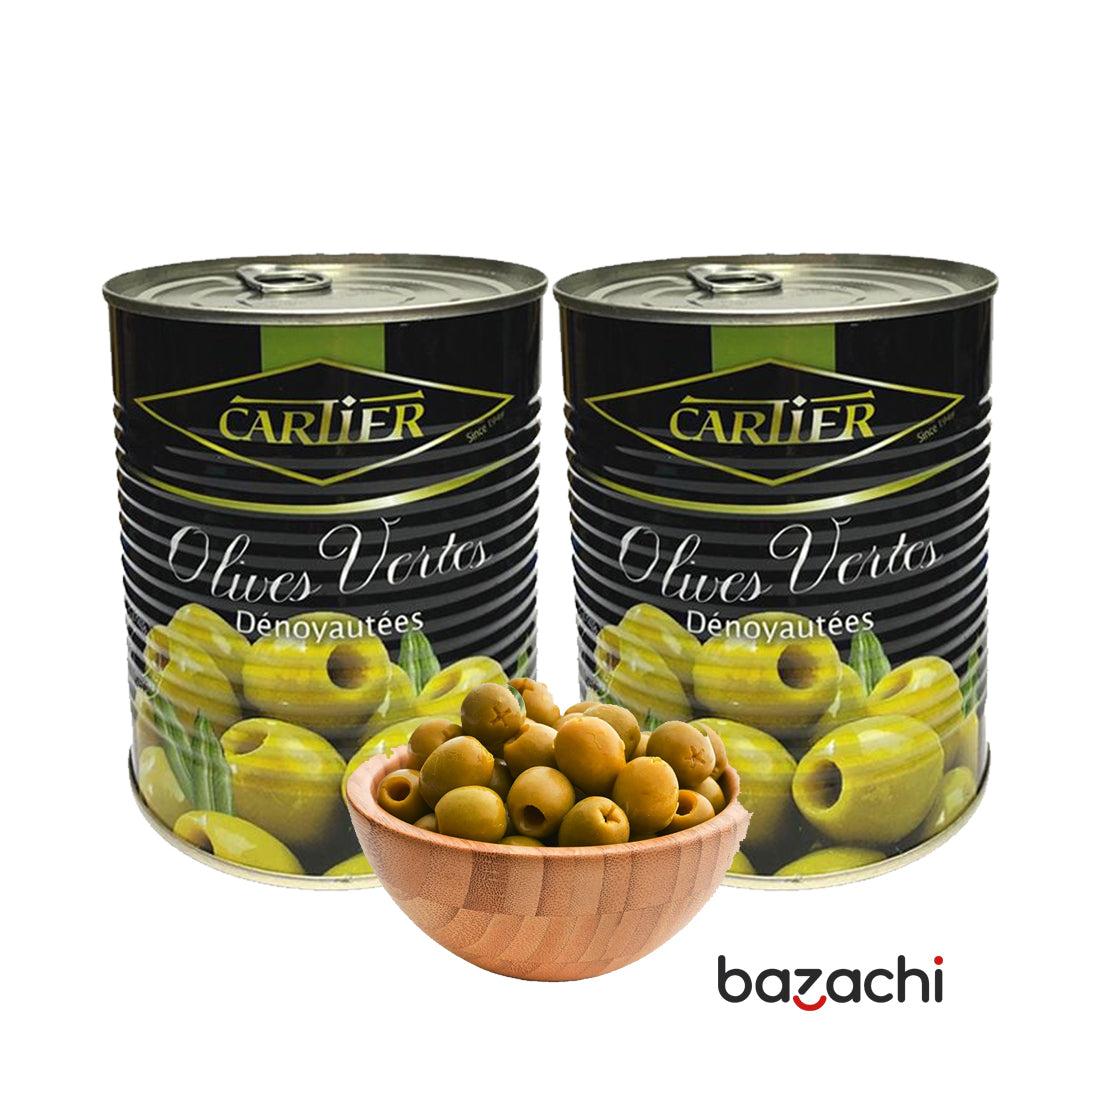 Cartier Green Pitted Olives (1 Kg)